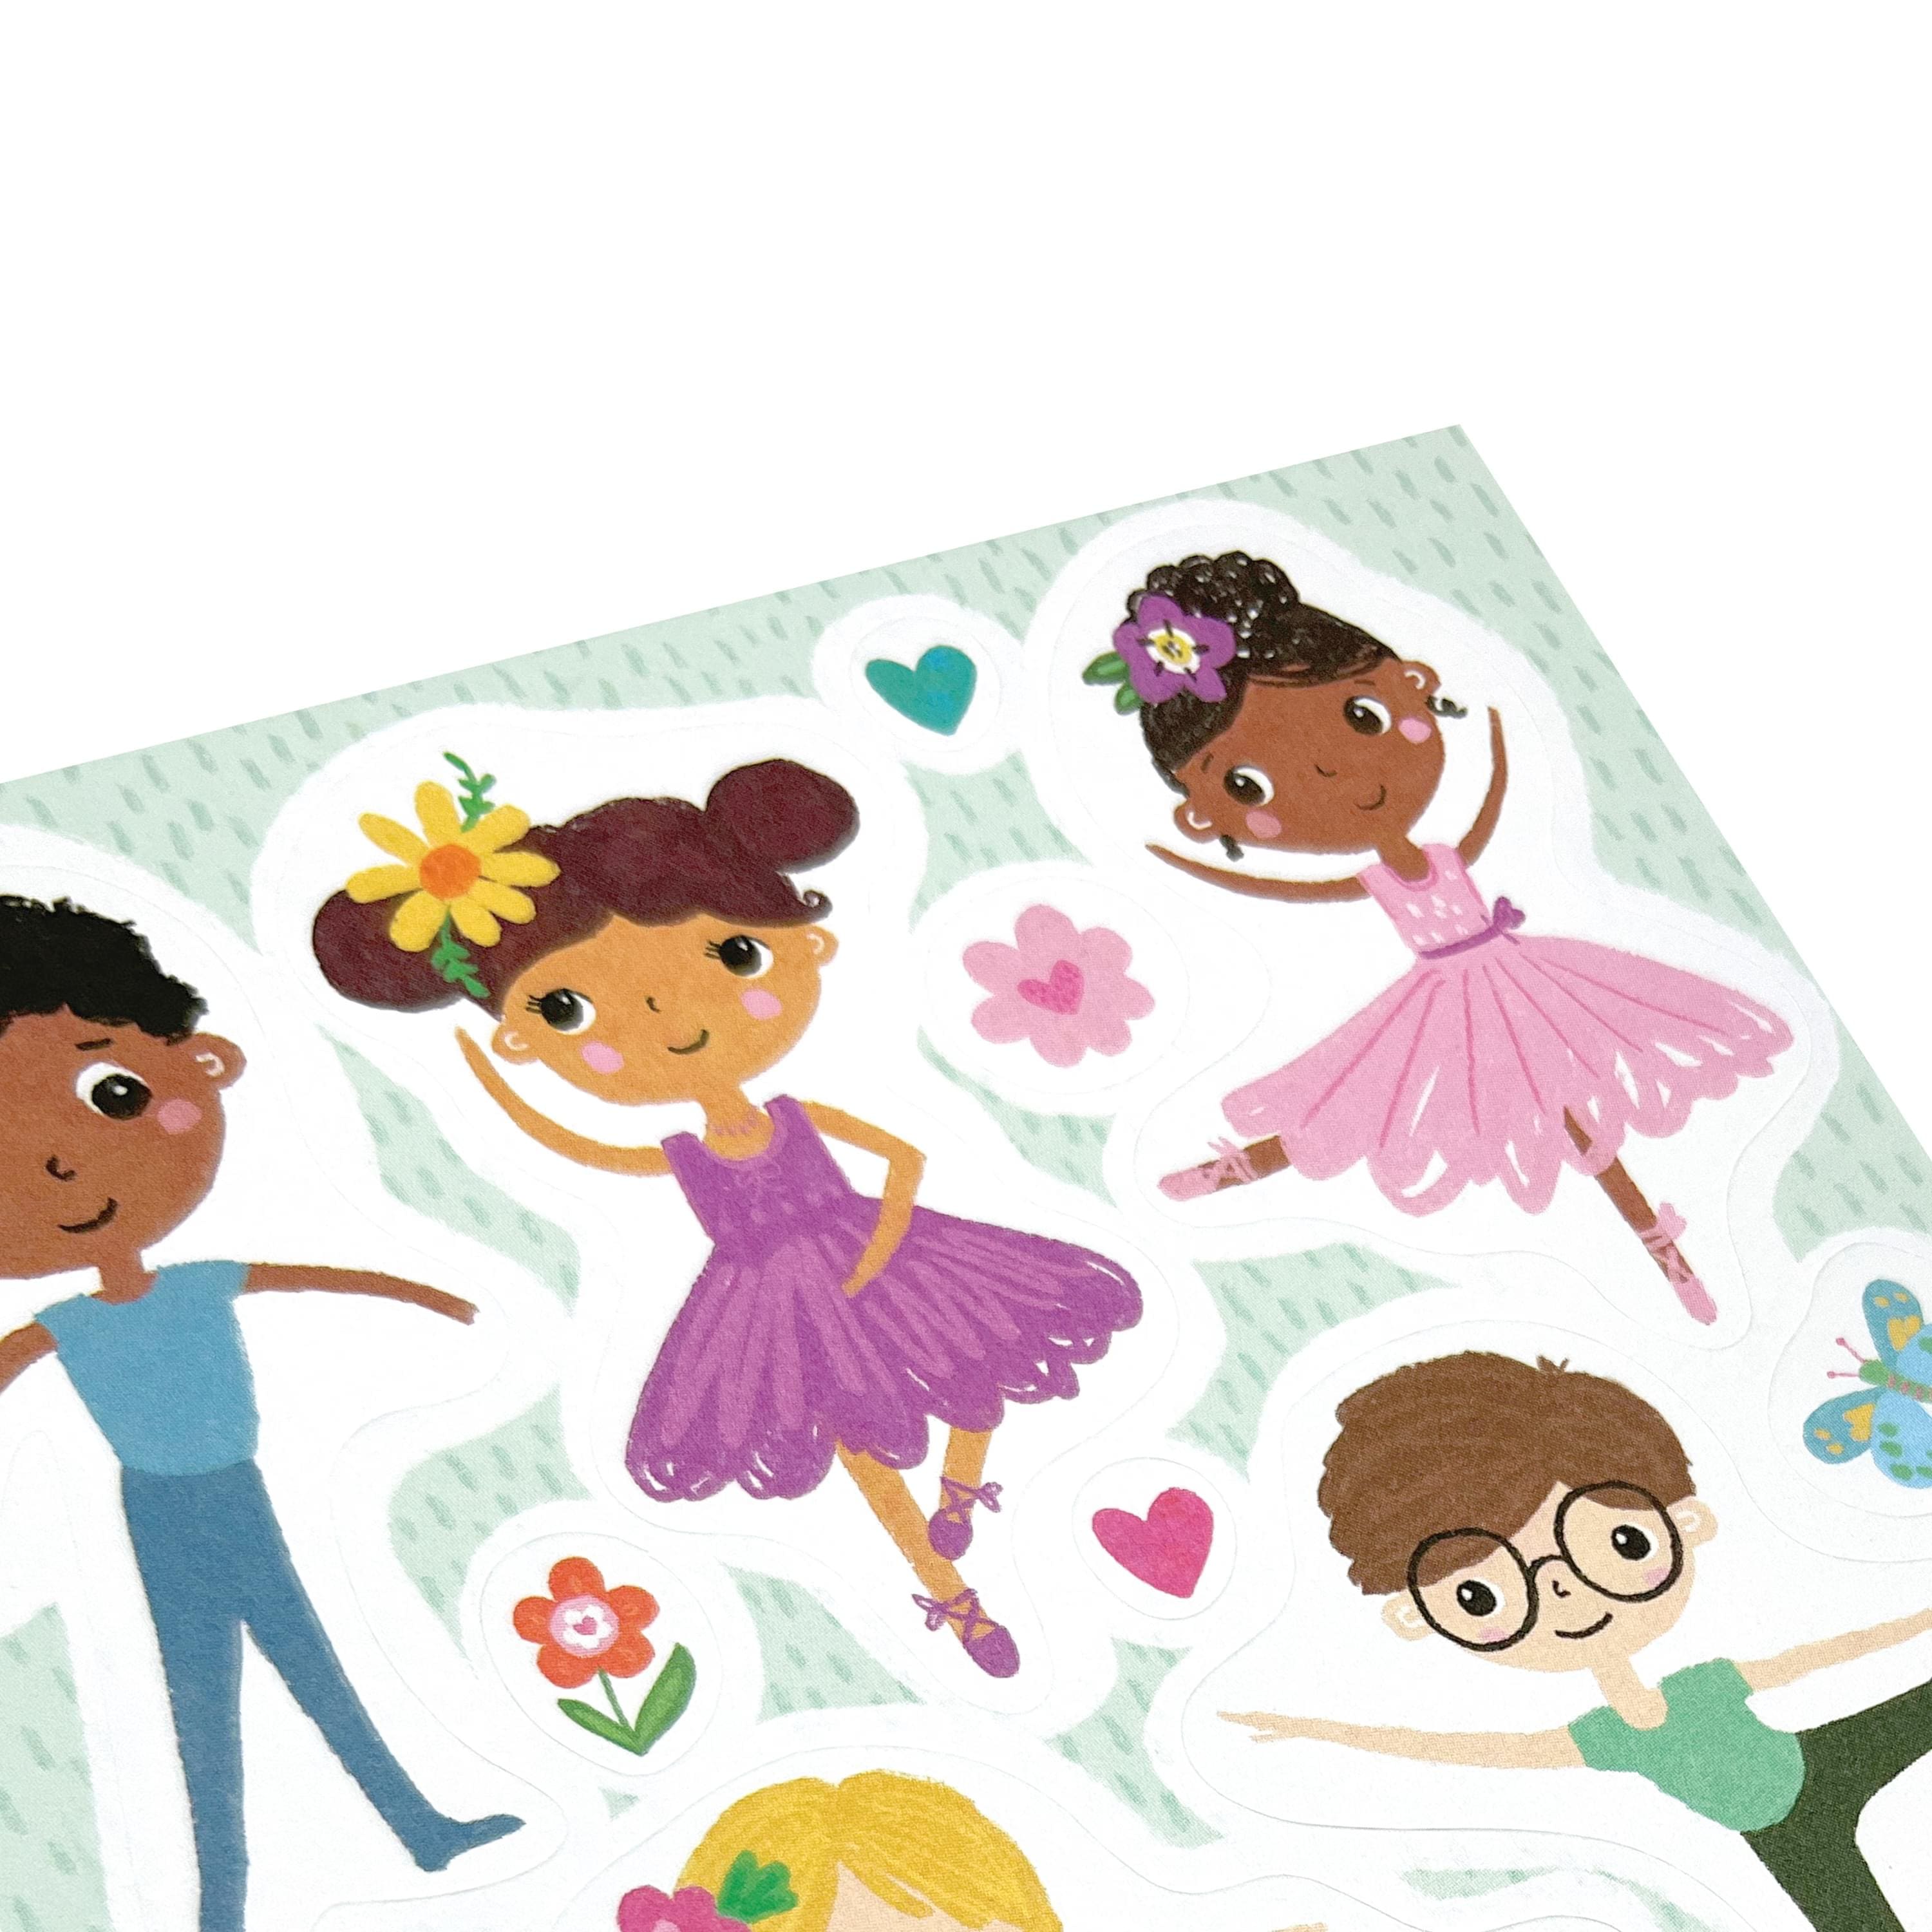 OOLY Stickiville Standard Tiny Dancers Stickers